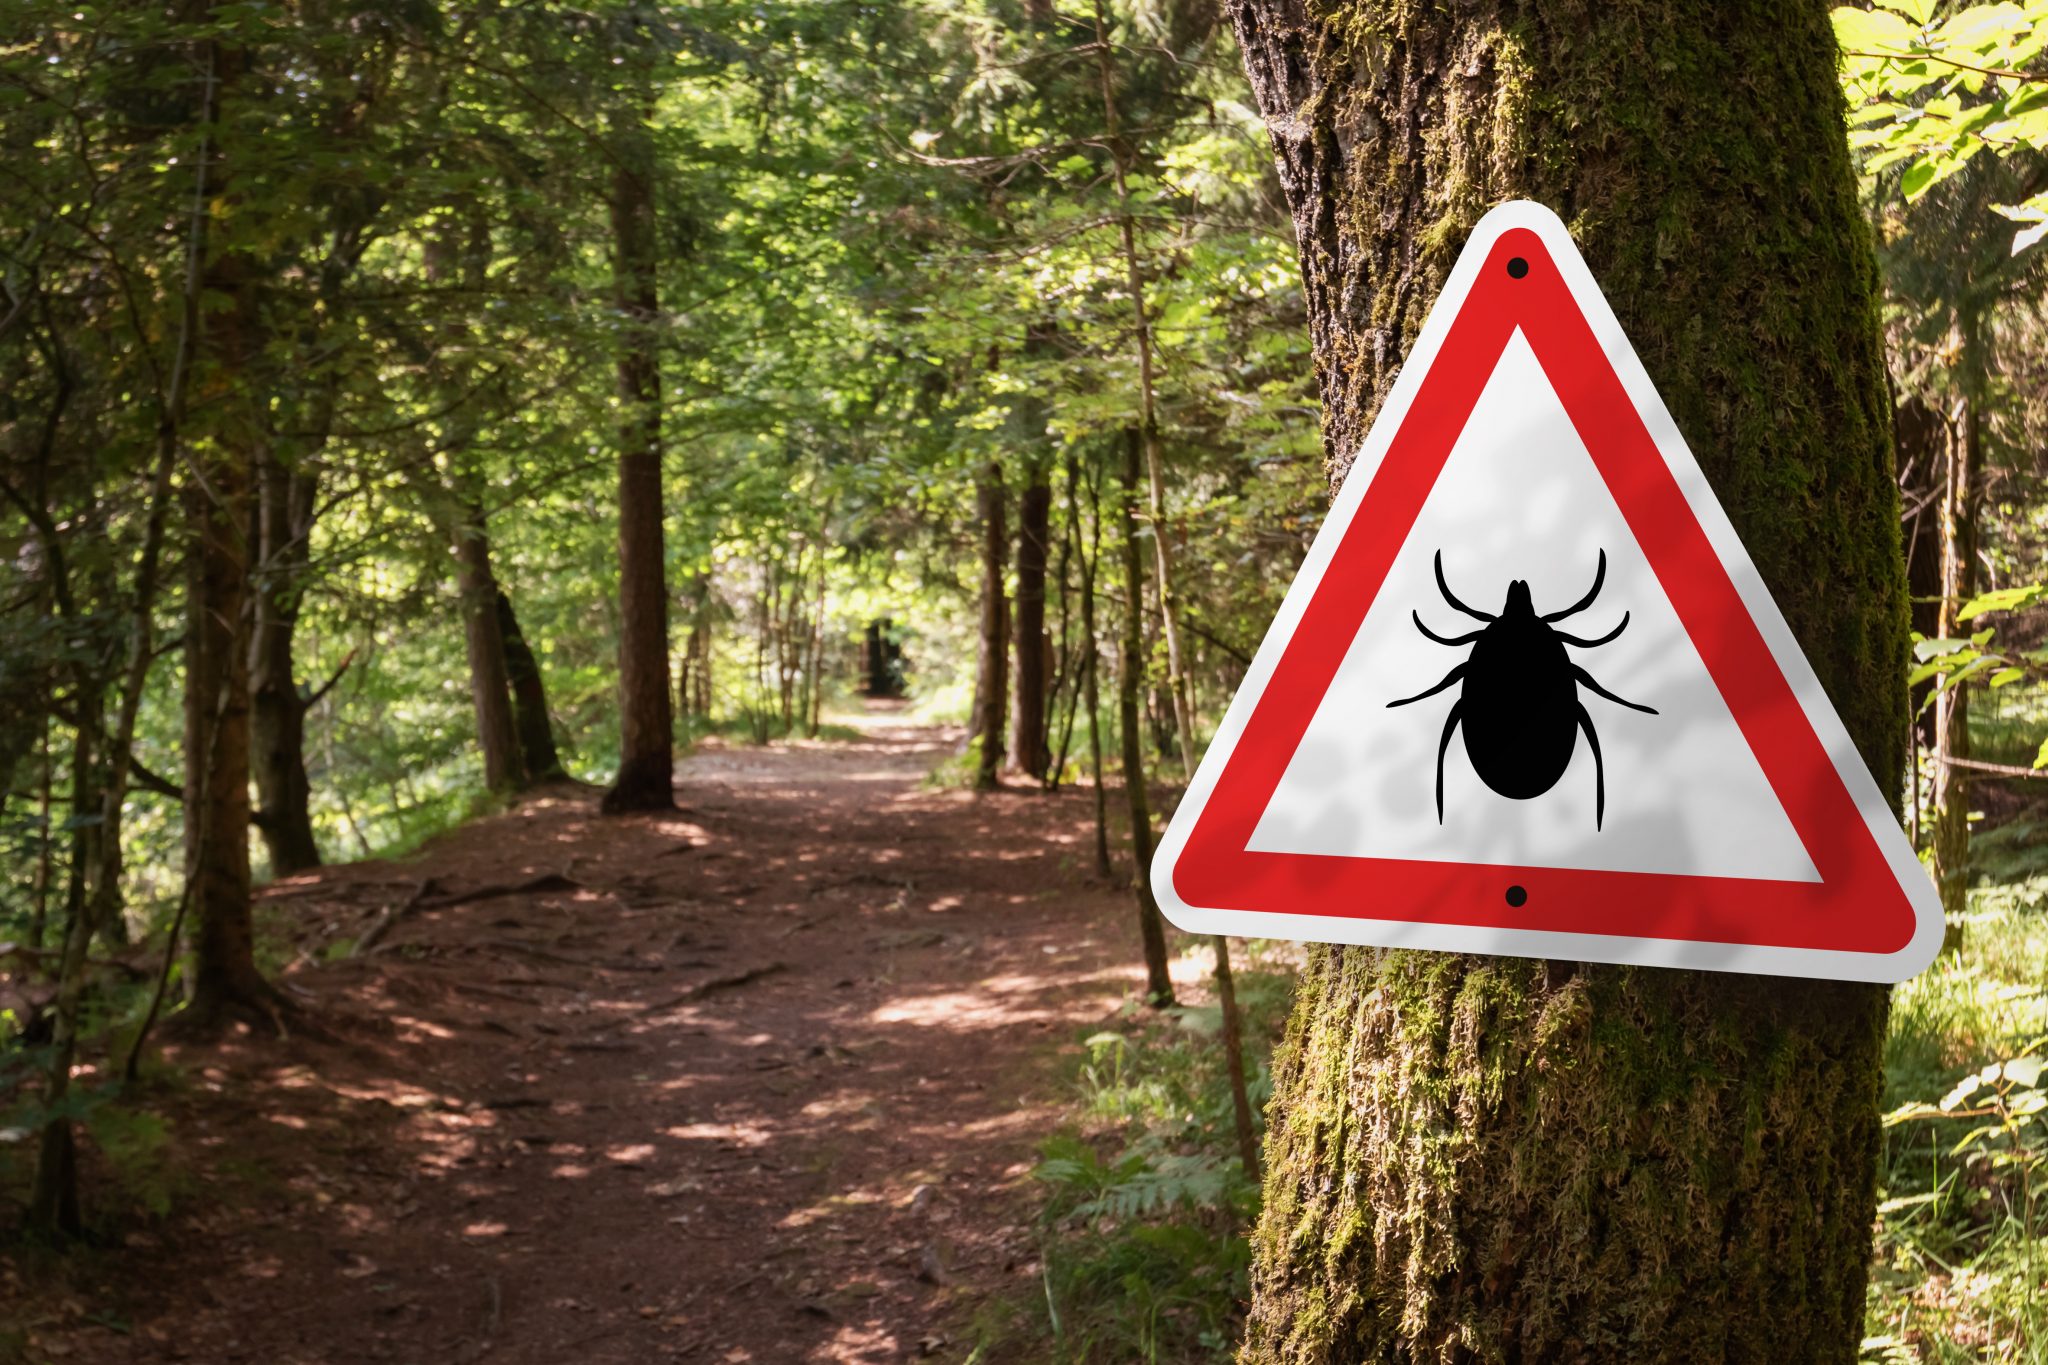 Tick insect warning sign in forest